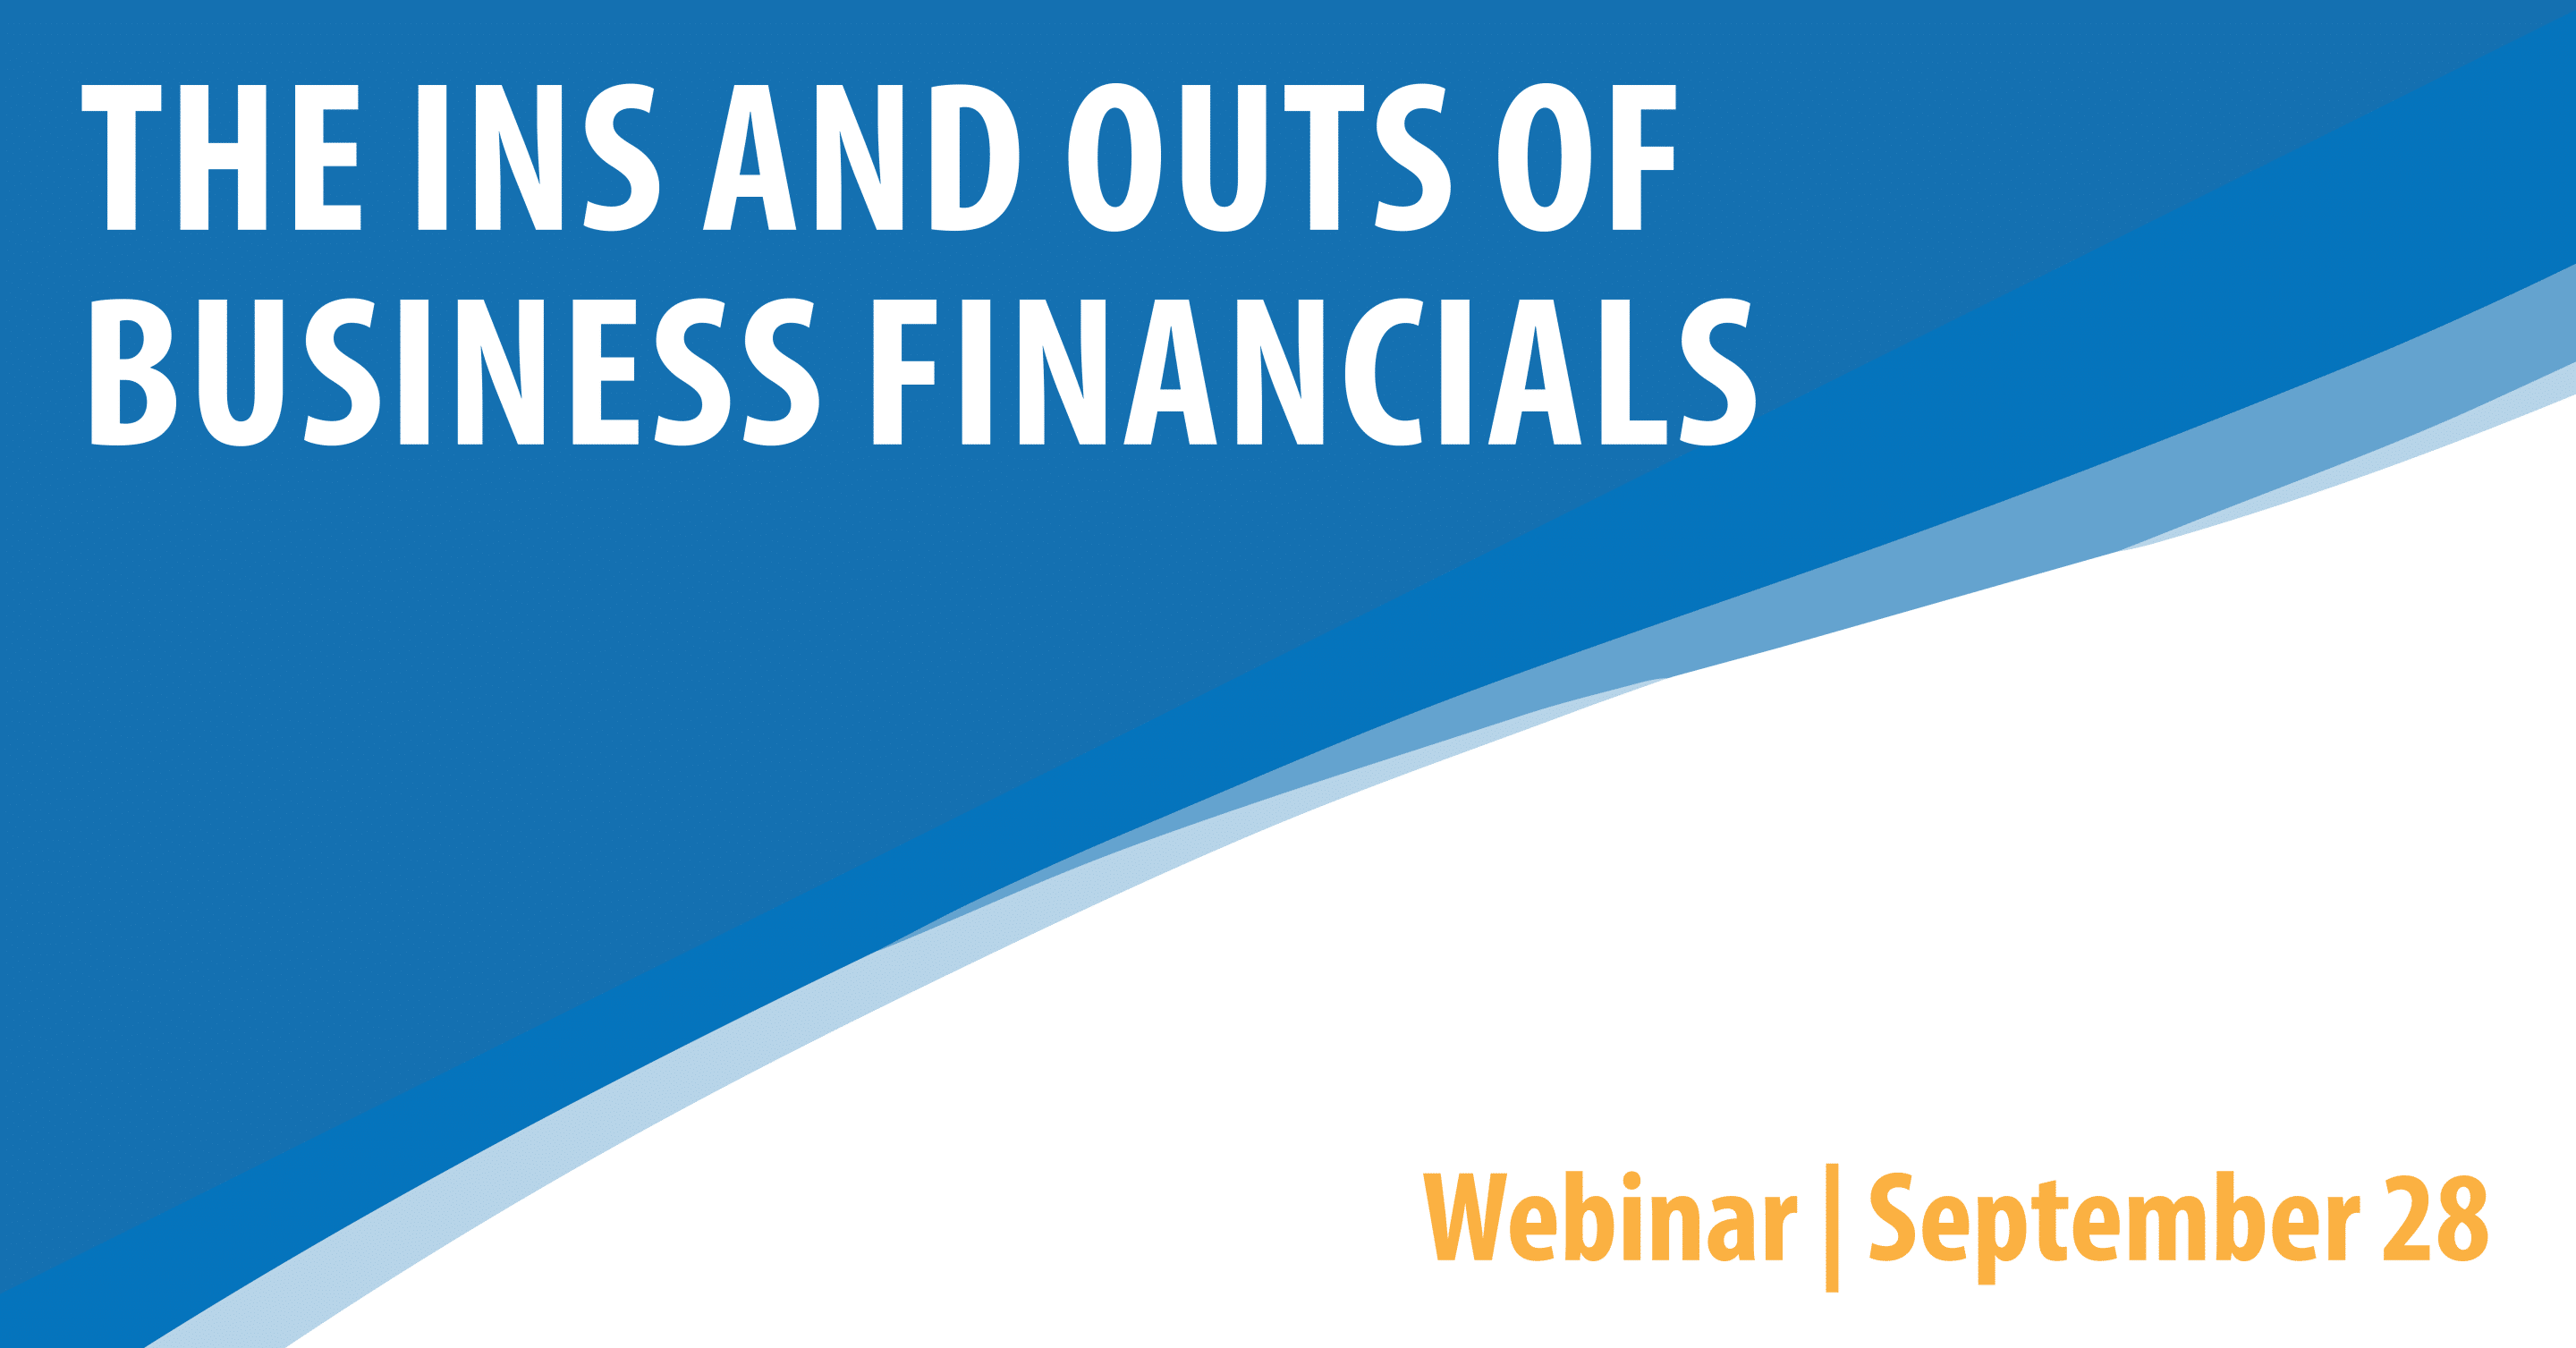 Business Fitness Webinar: The Ins and Outs of Business Financials